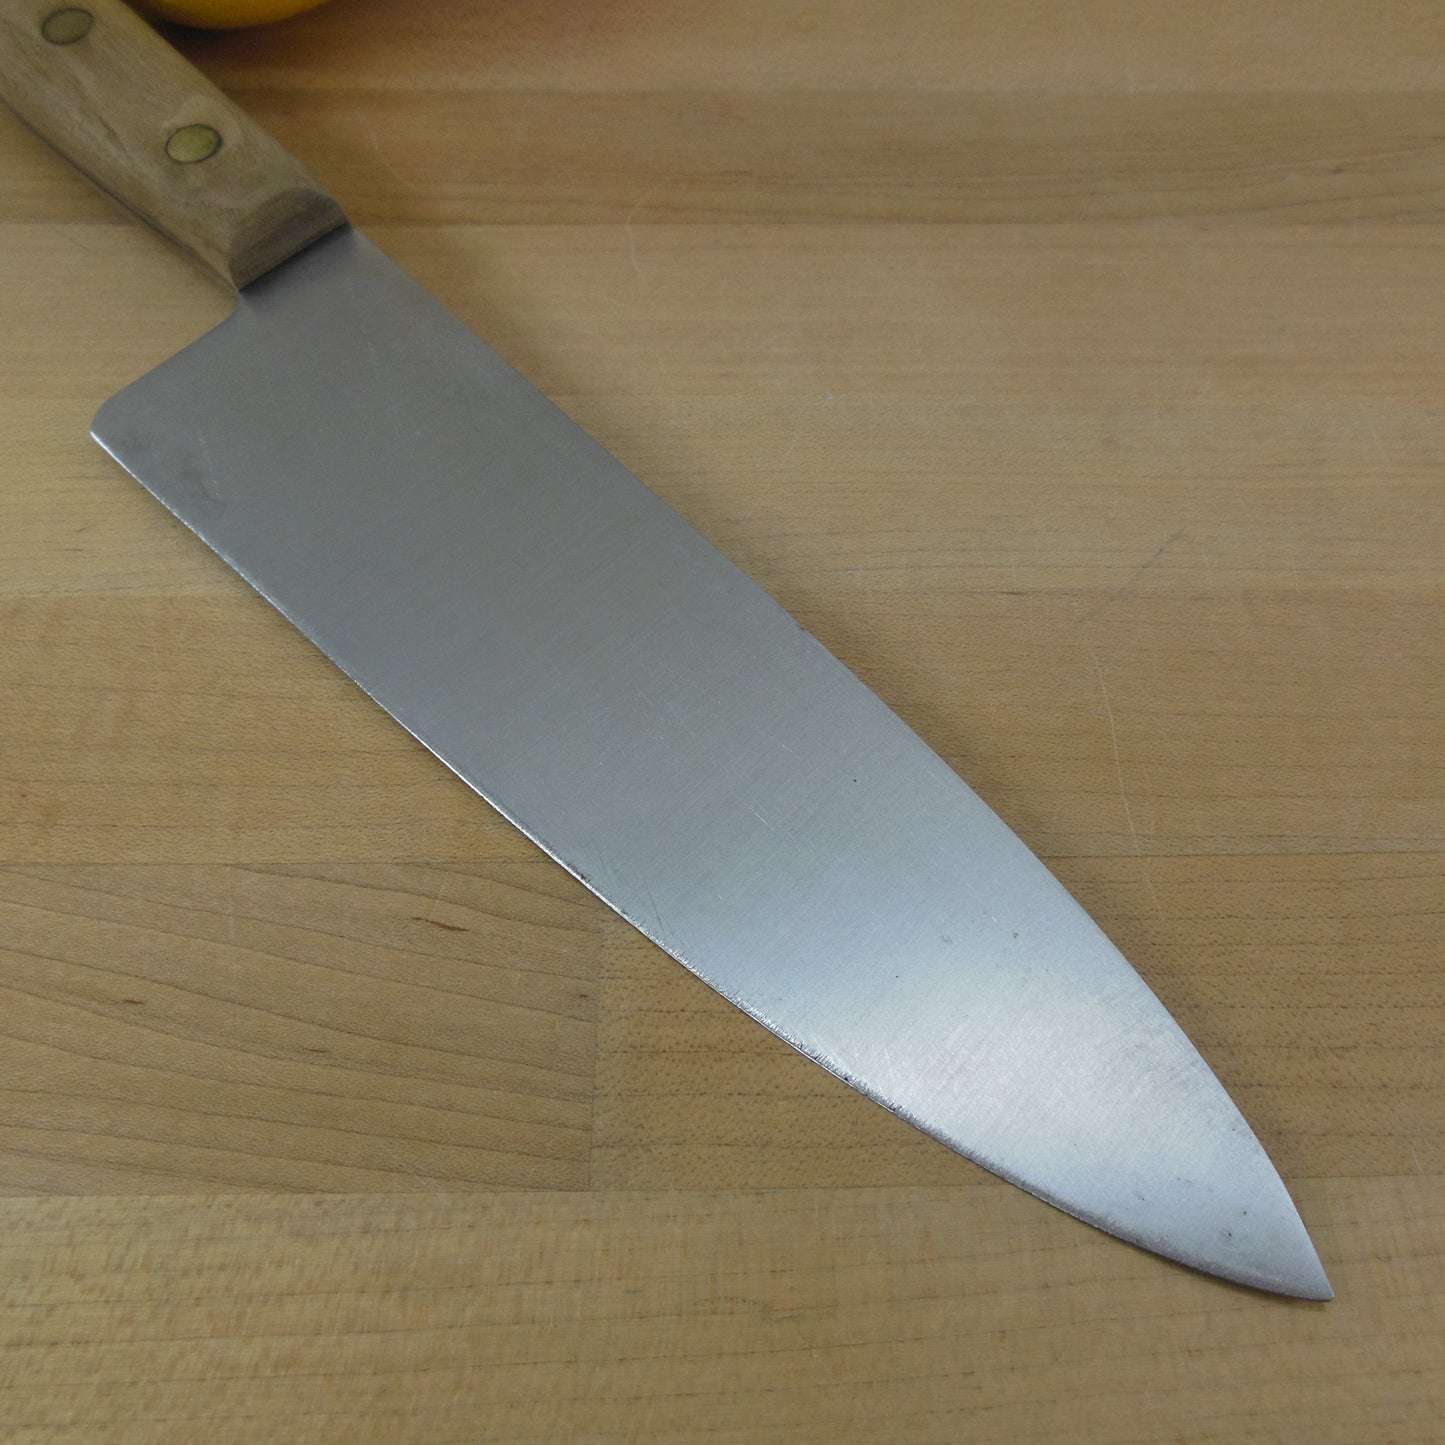 Chicago Cutlery USA 42S Chef 8" Knife - Walnut Handle Stainless Steel used